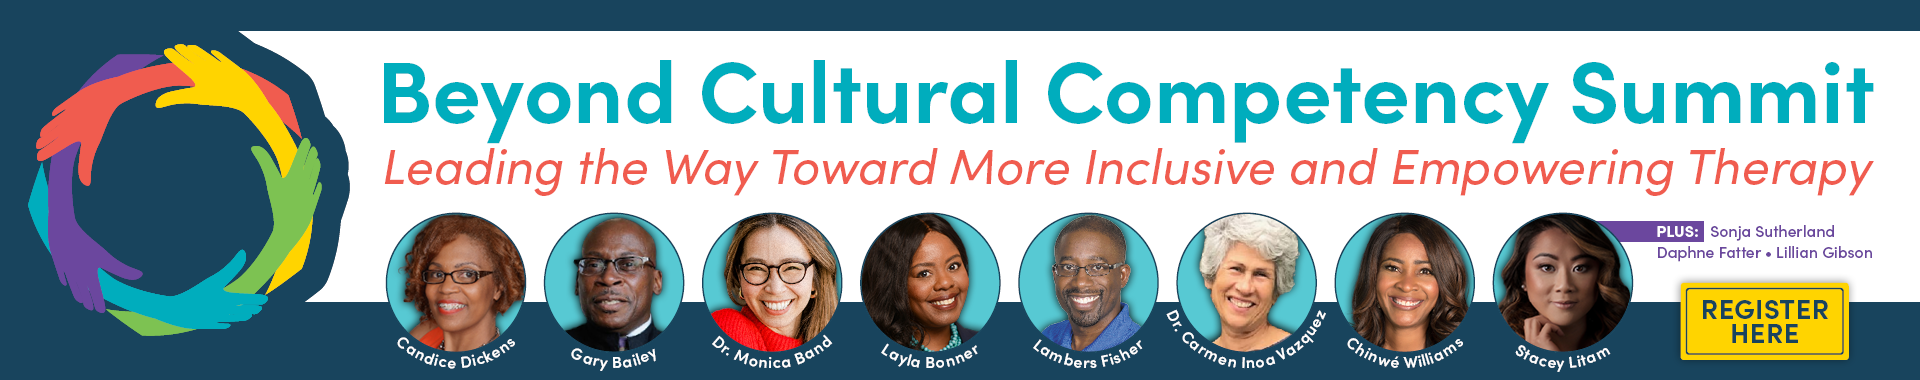 Beyond Cultural Competency Summit Complete Recording Package